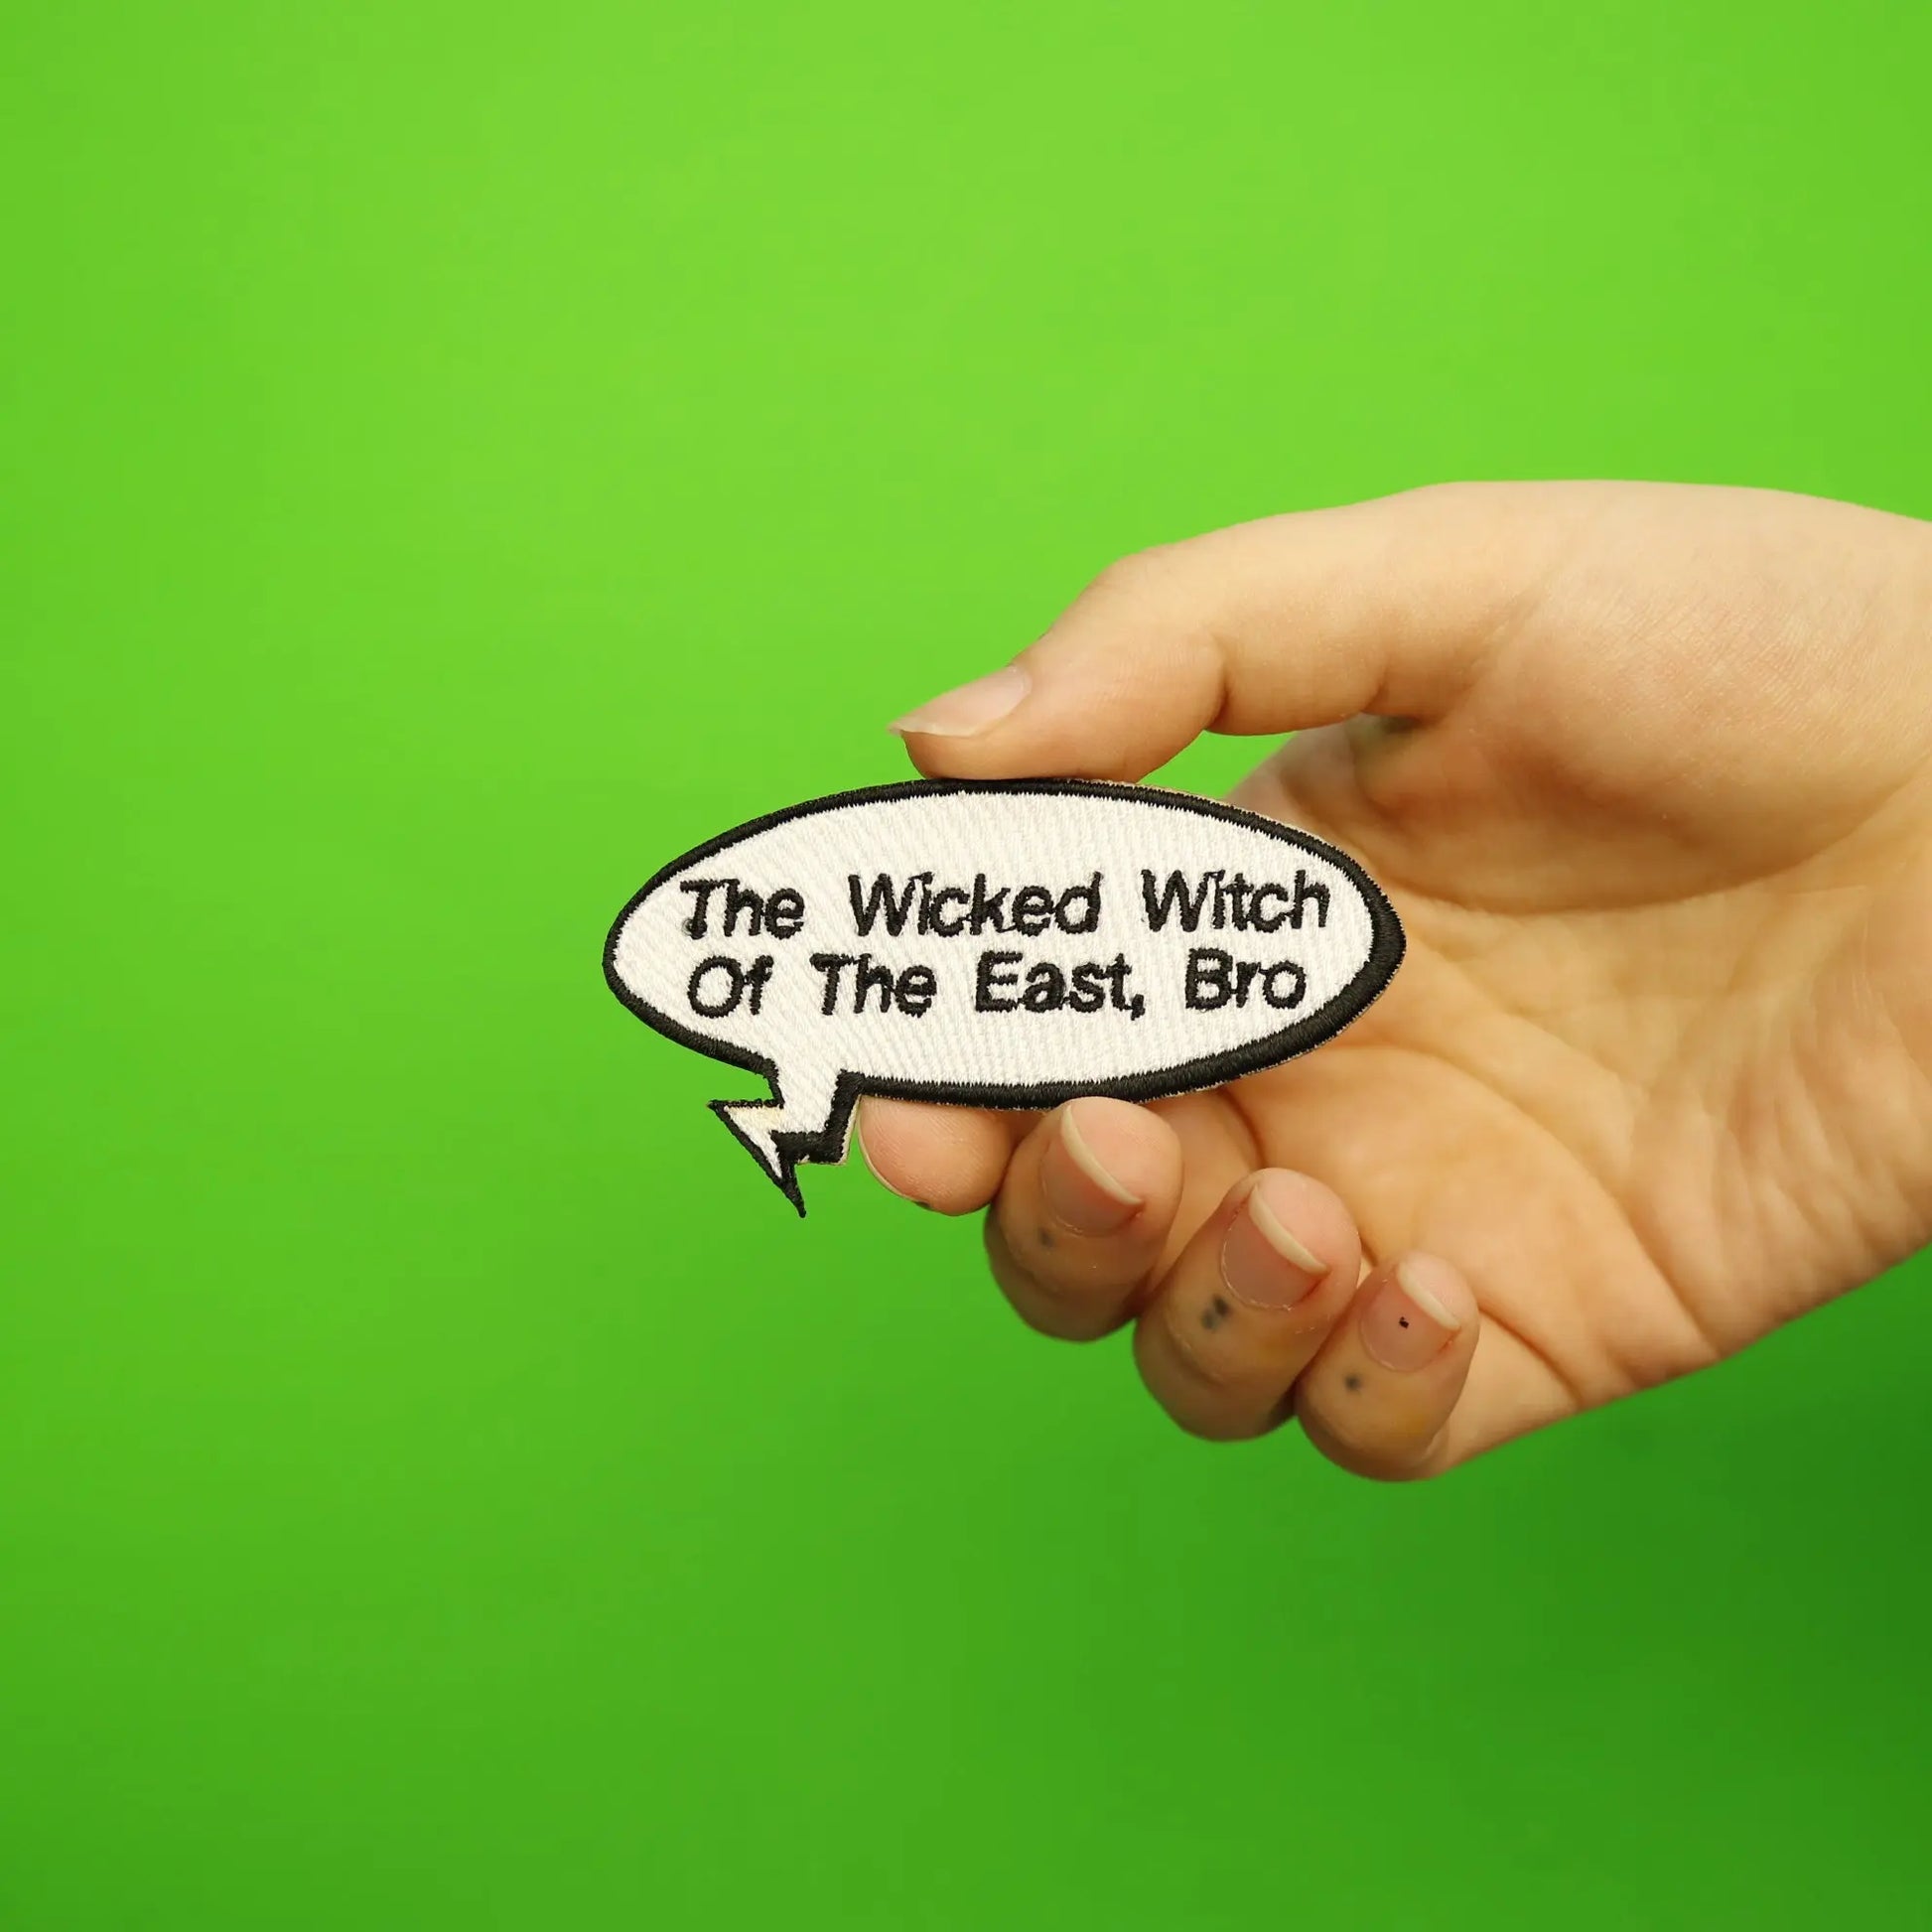 Funny "Wicked Witch Of The East, Bro" Word Bubble Embroidered Iron On Patch 